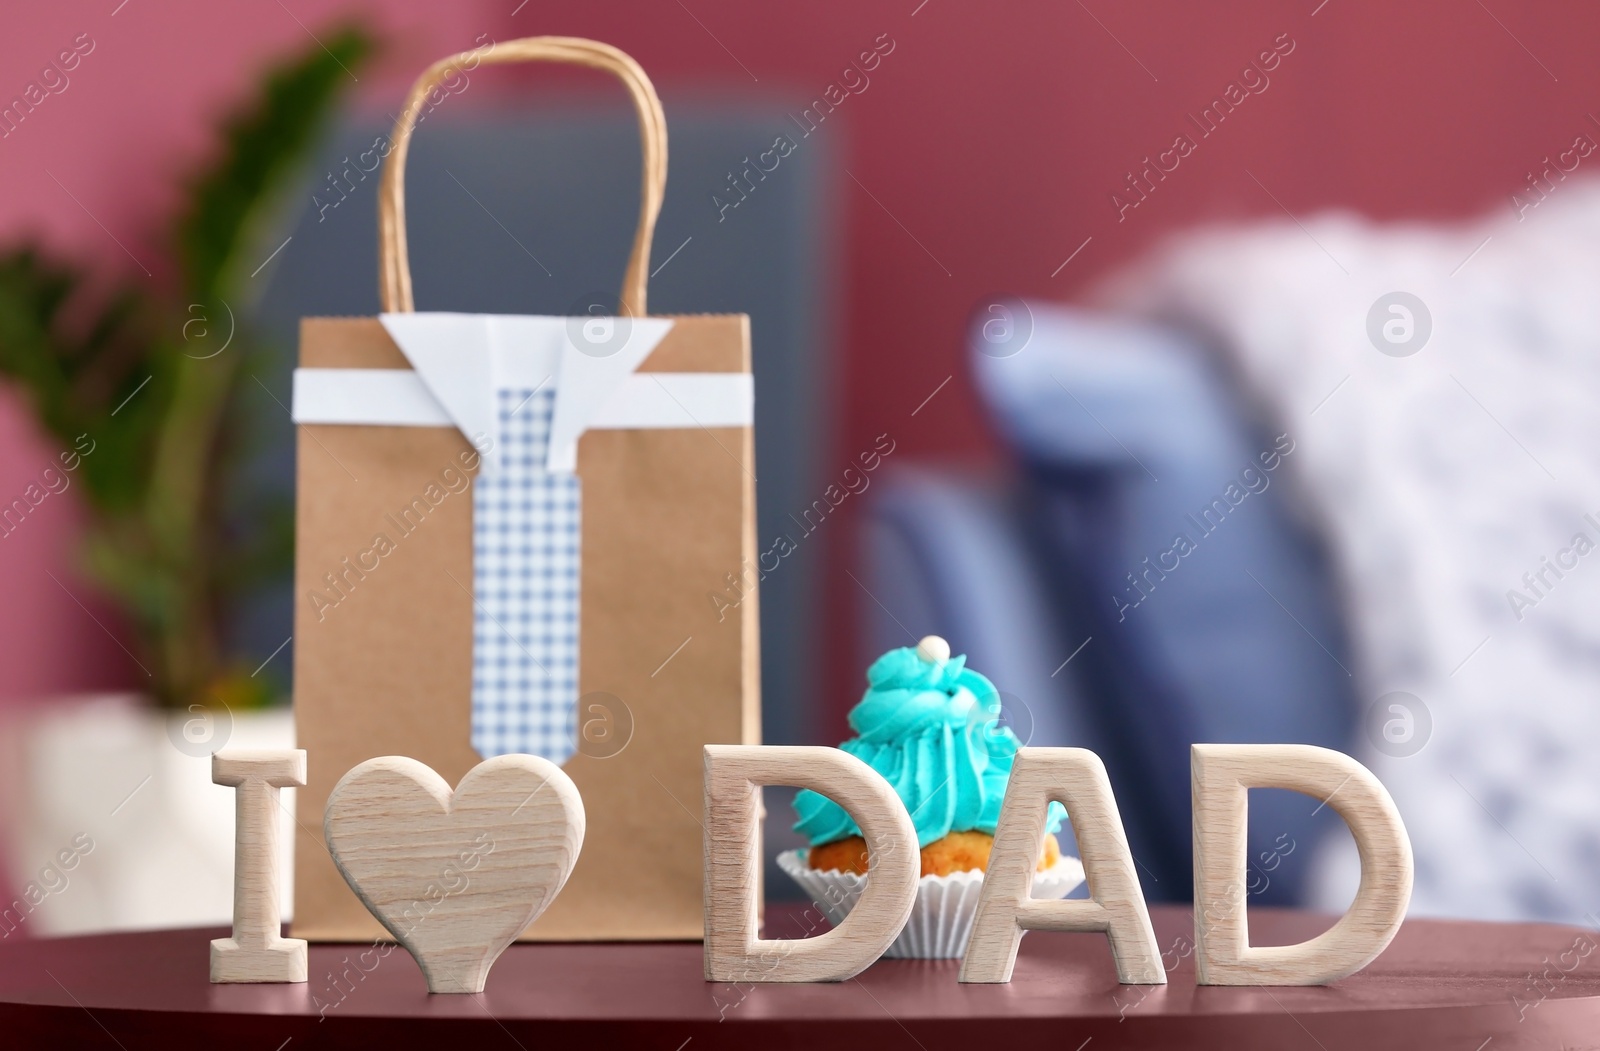 Photo of Phrase "I love dad" and gift bag on table. Father's day celebration